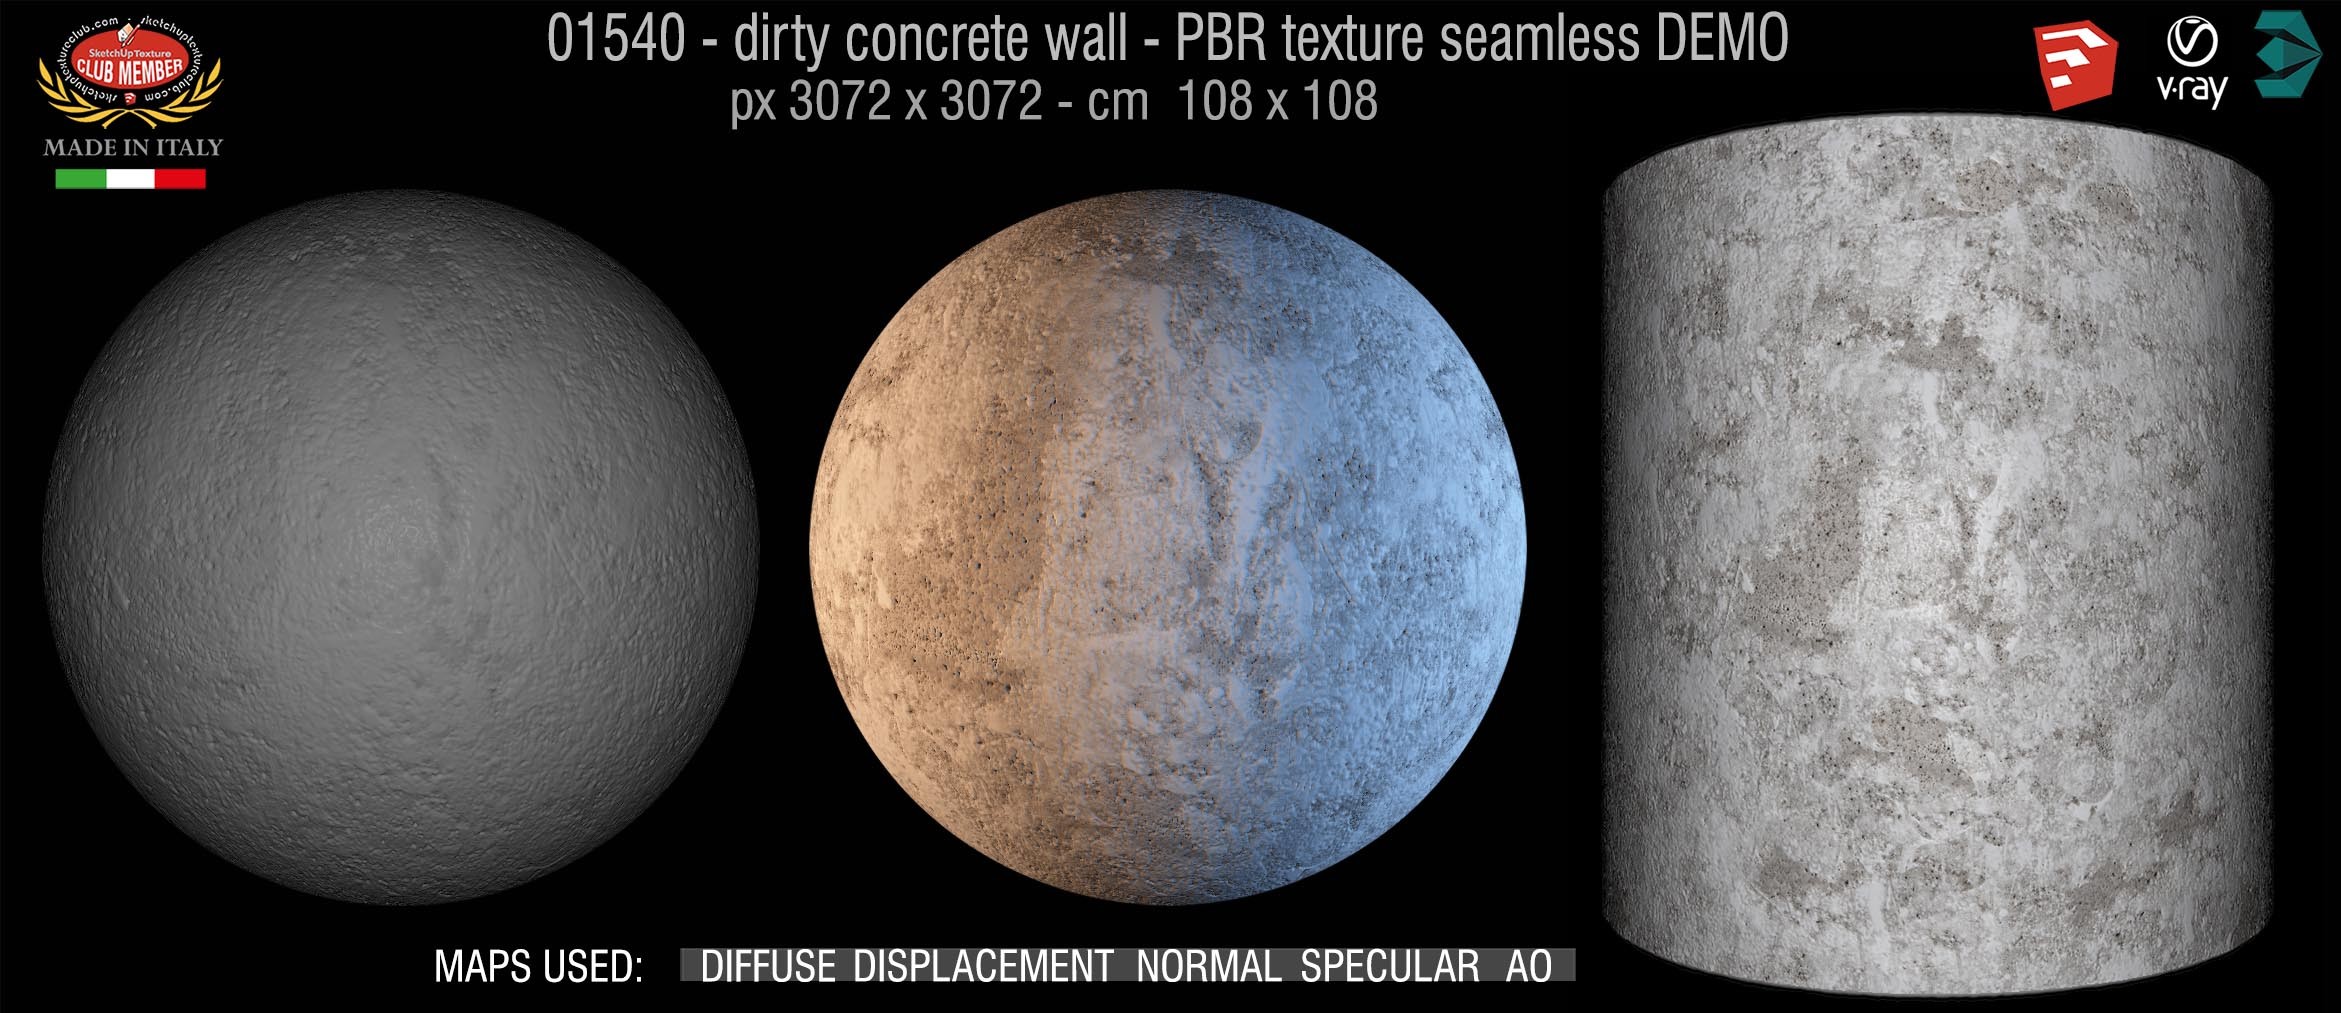 01540 Concrete bare dirty wall PBR texture seamless DEMO